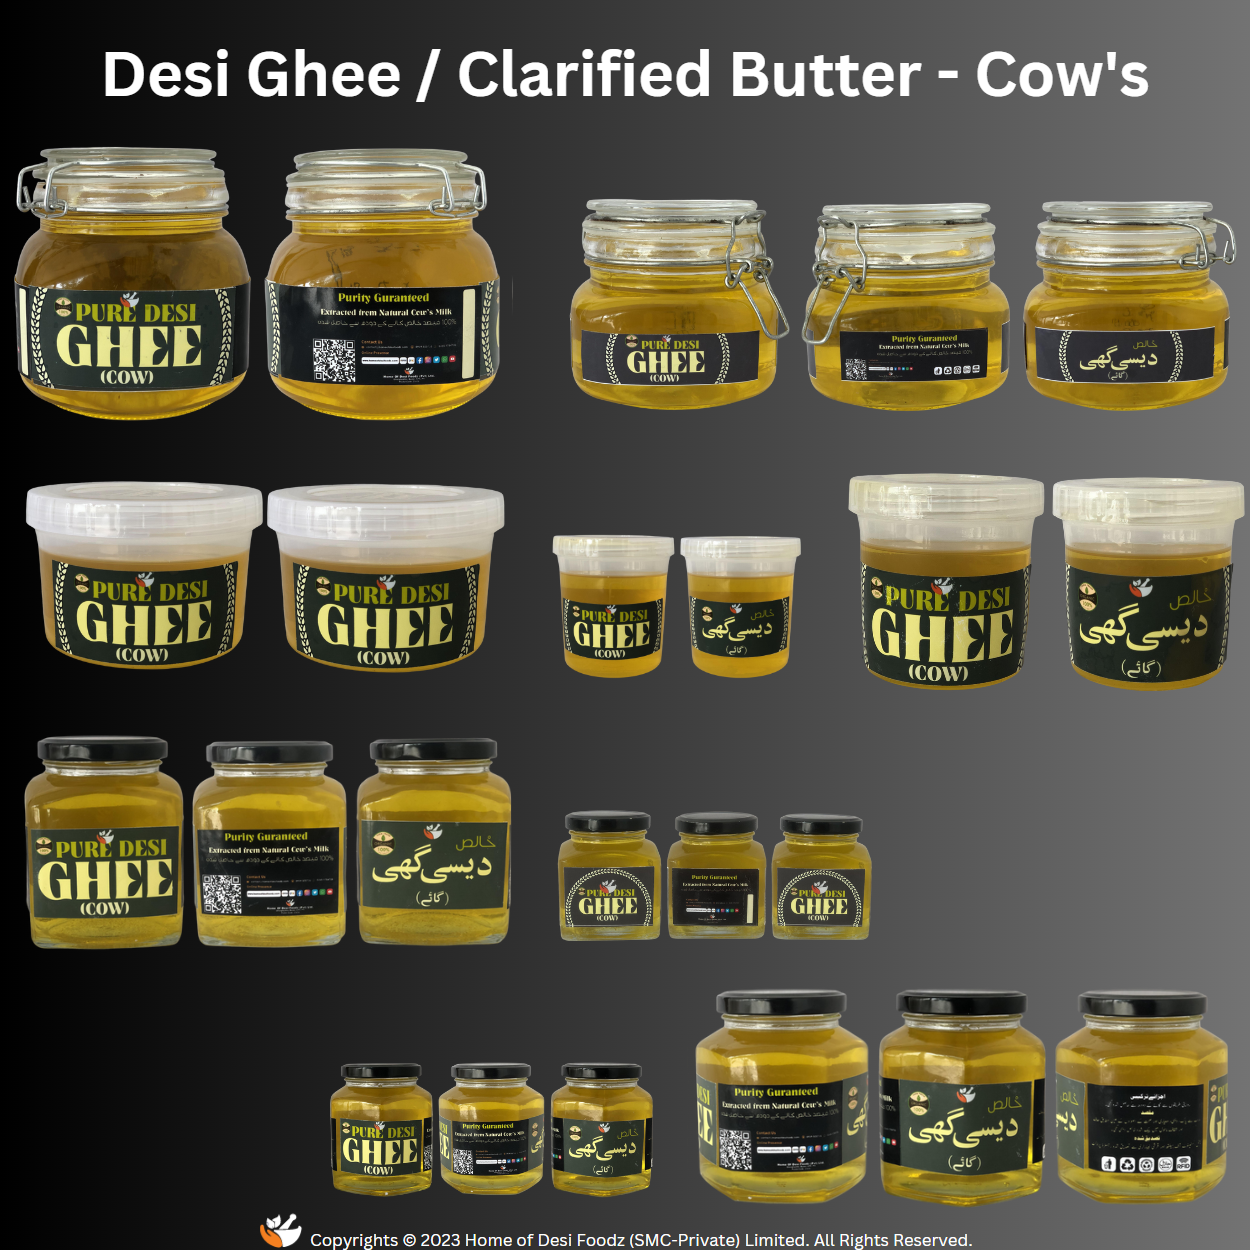 images/sliders/mobile/cows-desi-ghee-clarifed-butter-by-home-of-desi-foodz.png